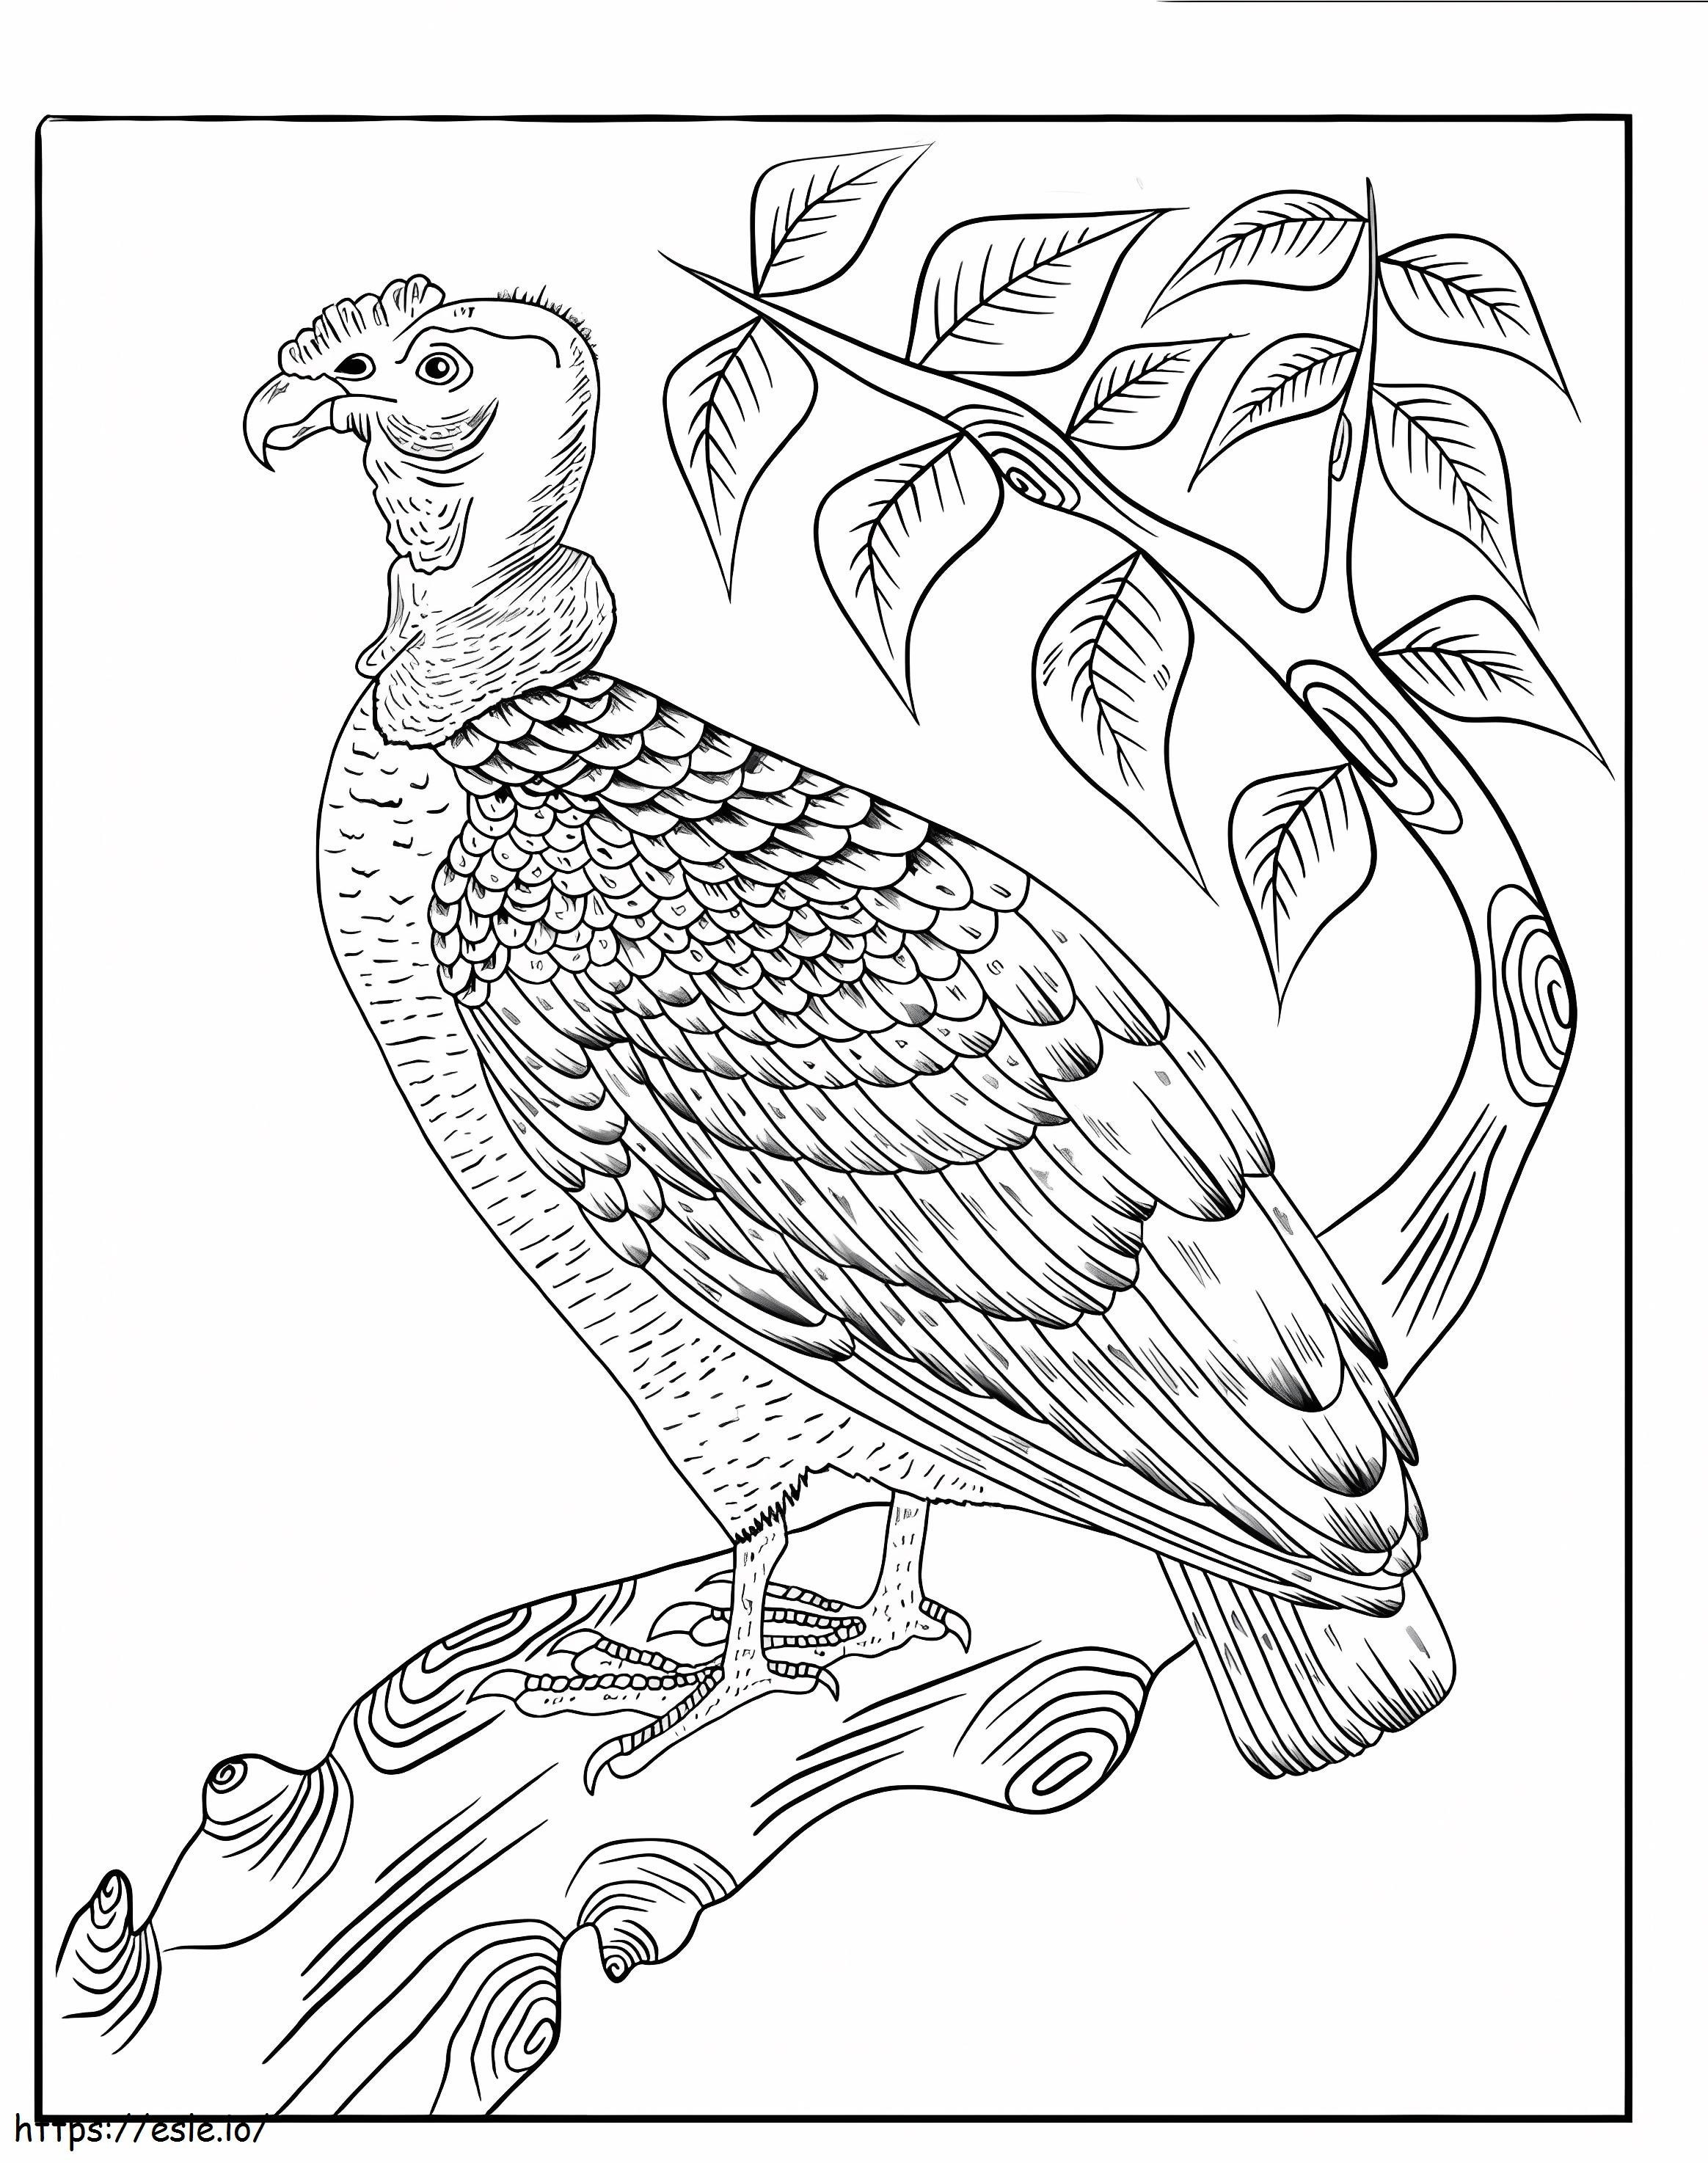 California Condor Standing On Tree Branch coloring page